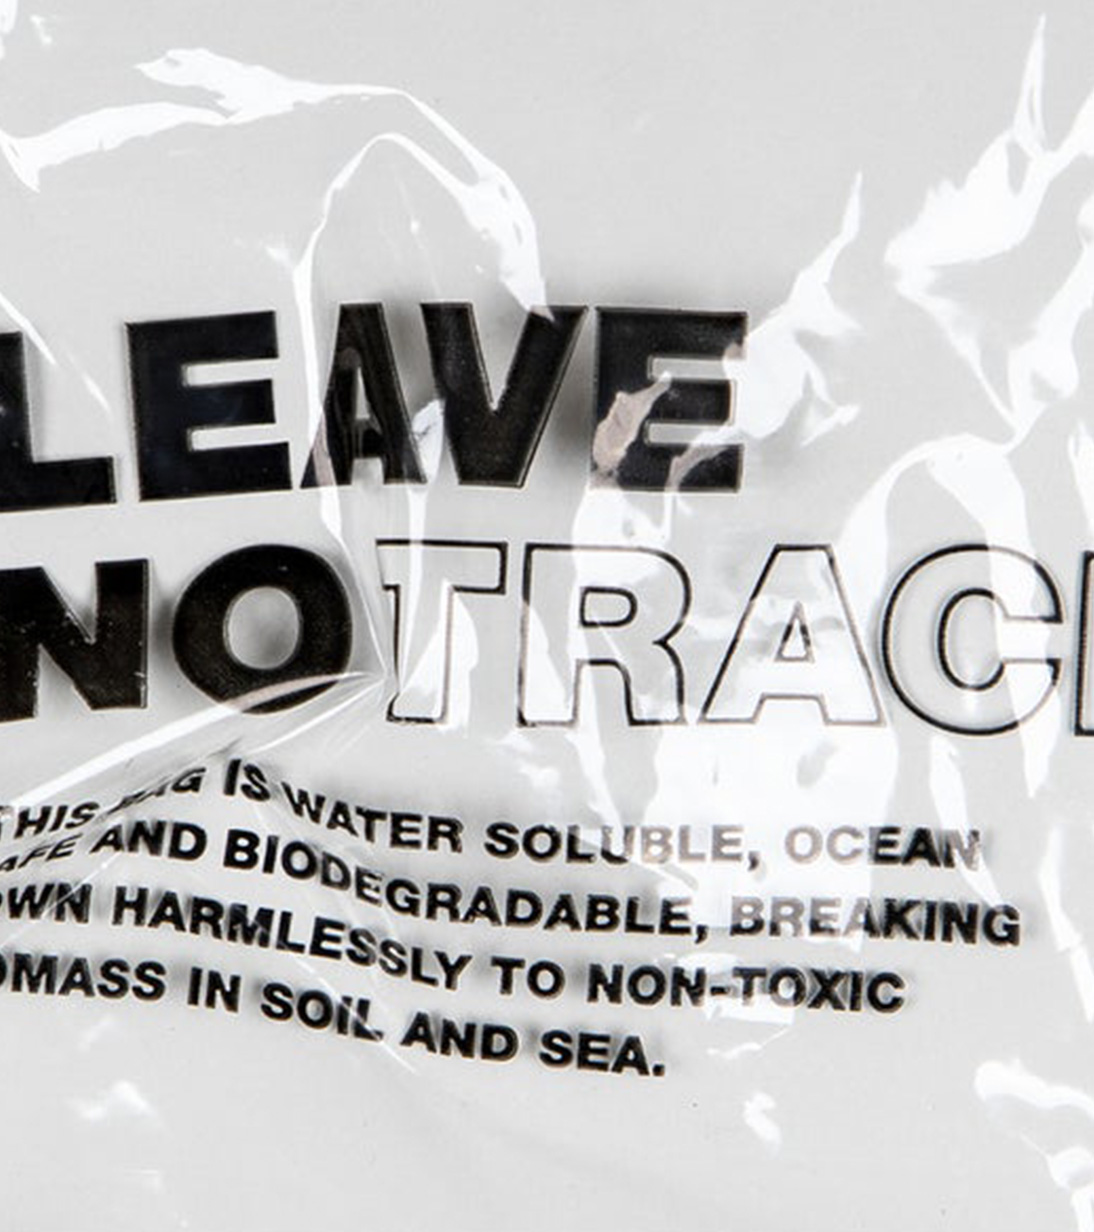 Leave No Trace Packaging